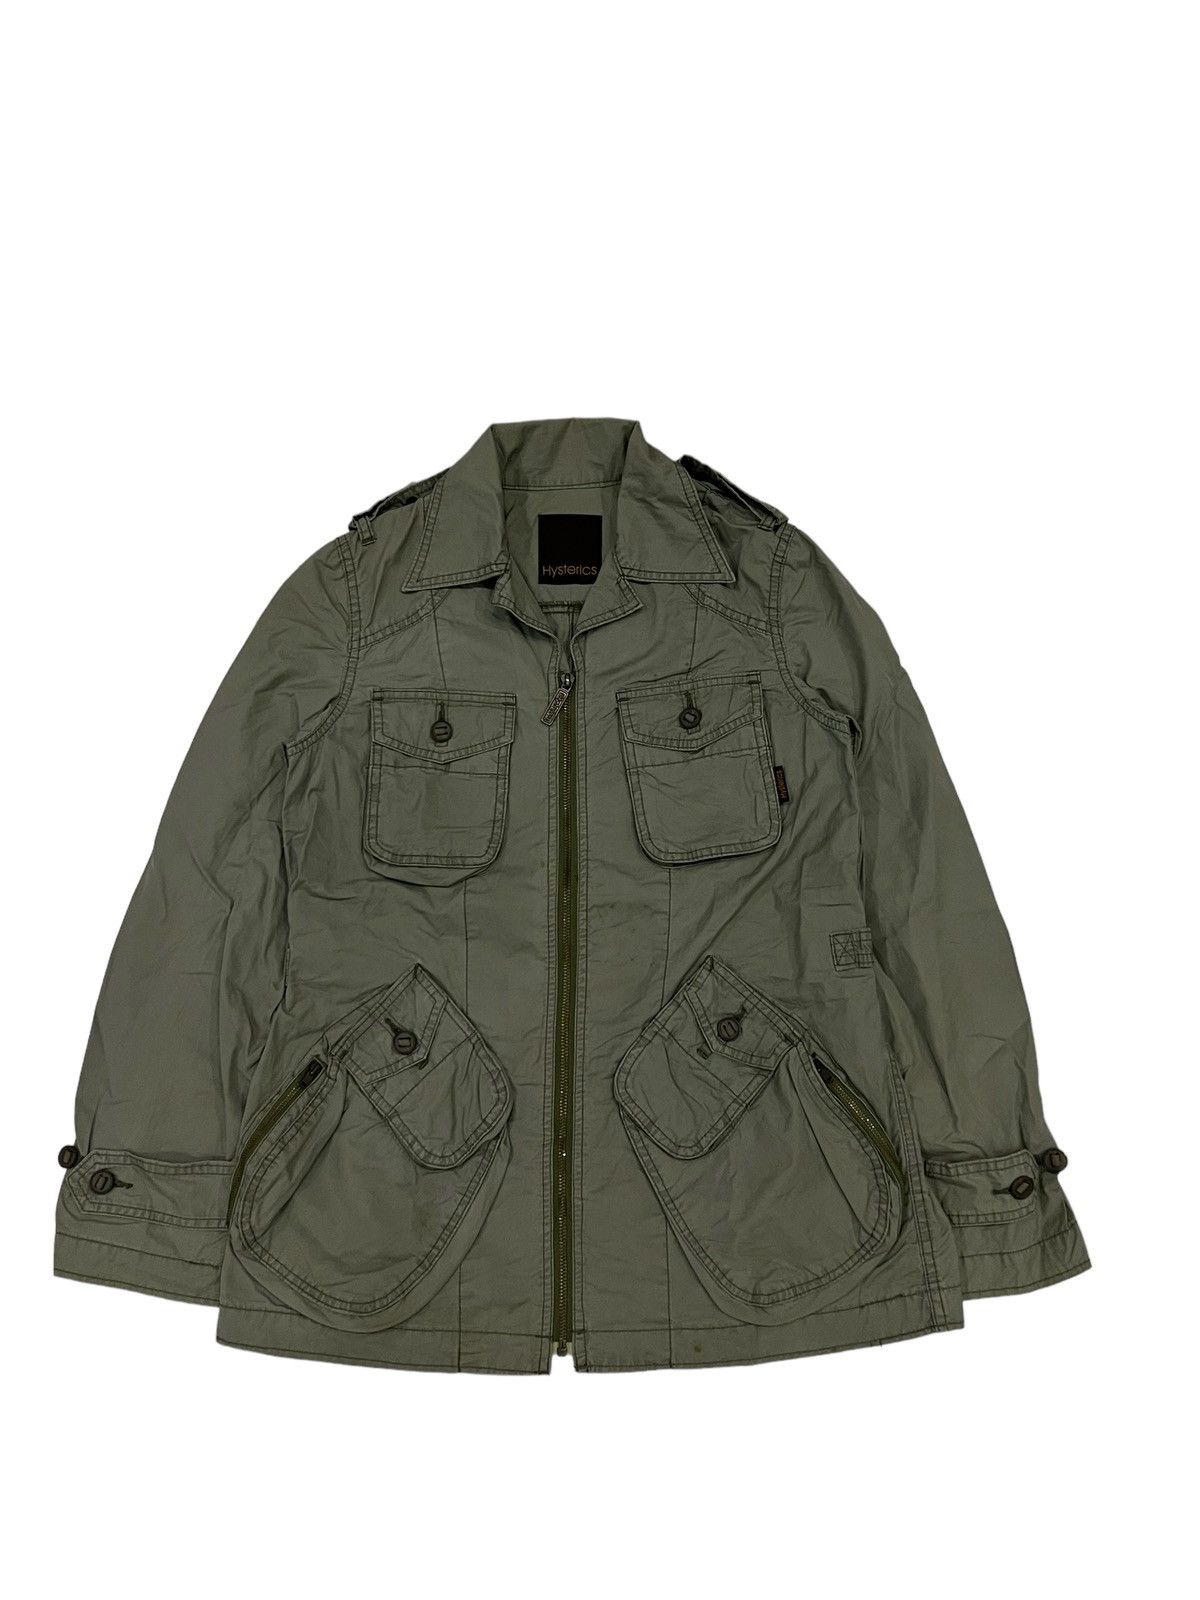 Hysteric Glamour 90s vintage hysteric glamour military jacket m65 ...